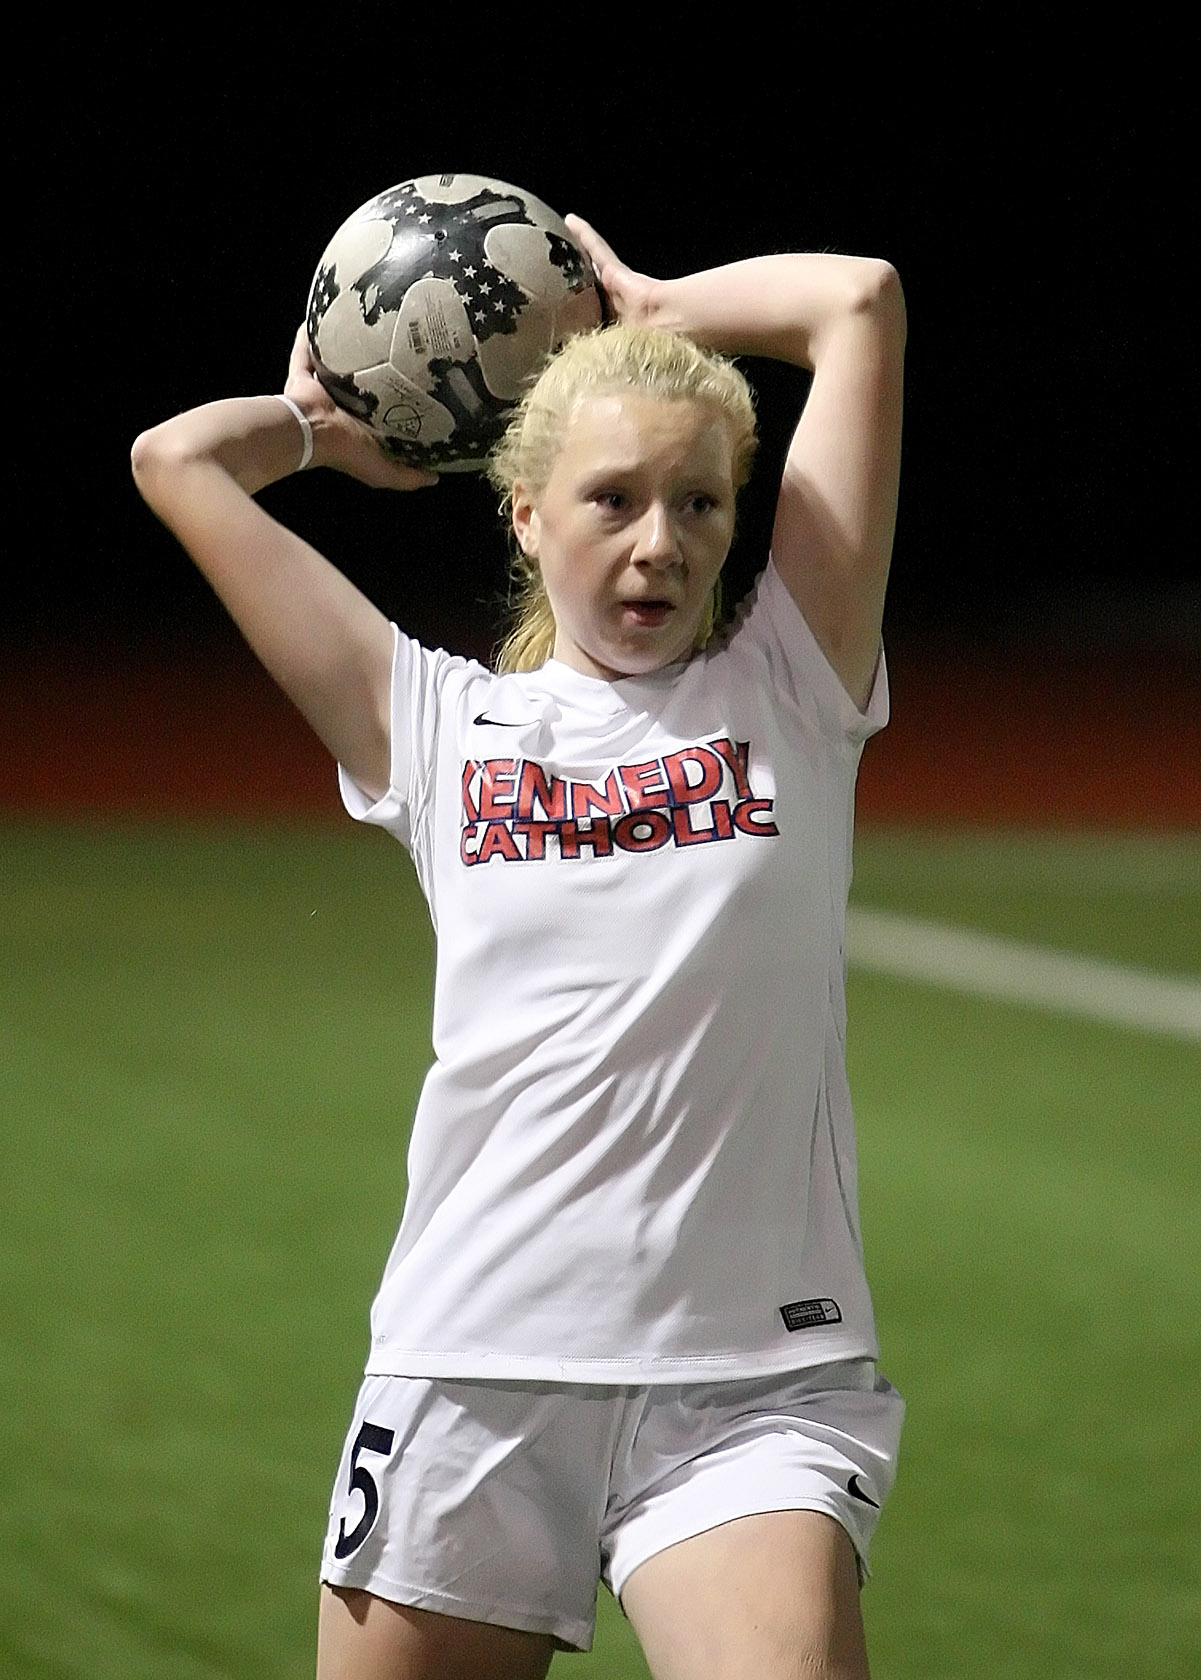 Cassidy Elicker of Kennedy Catholic throws the ball in from the sidelines.